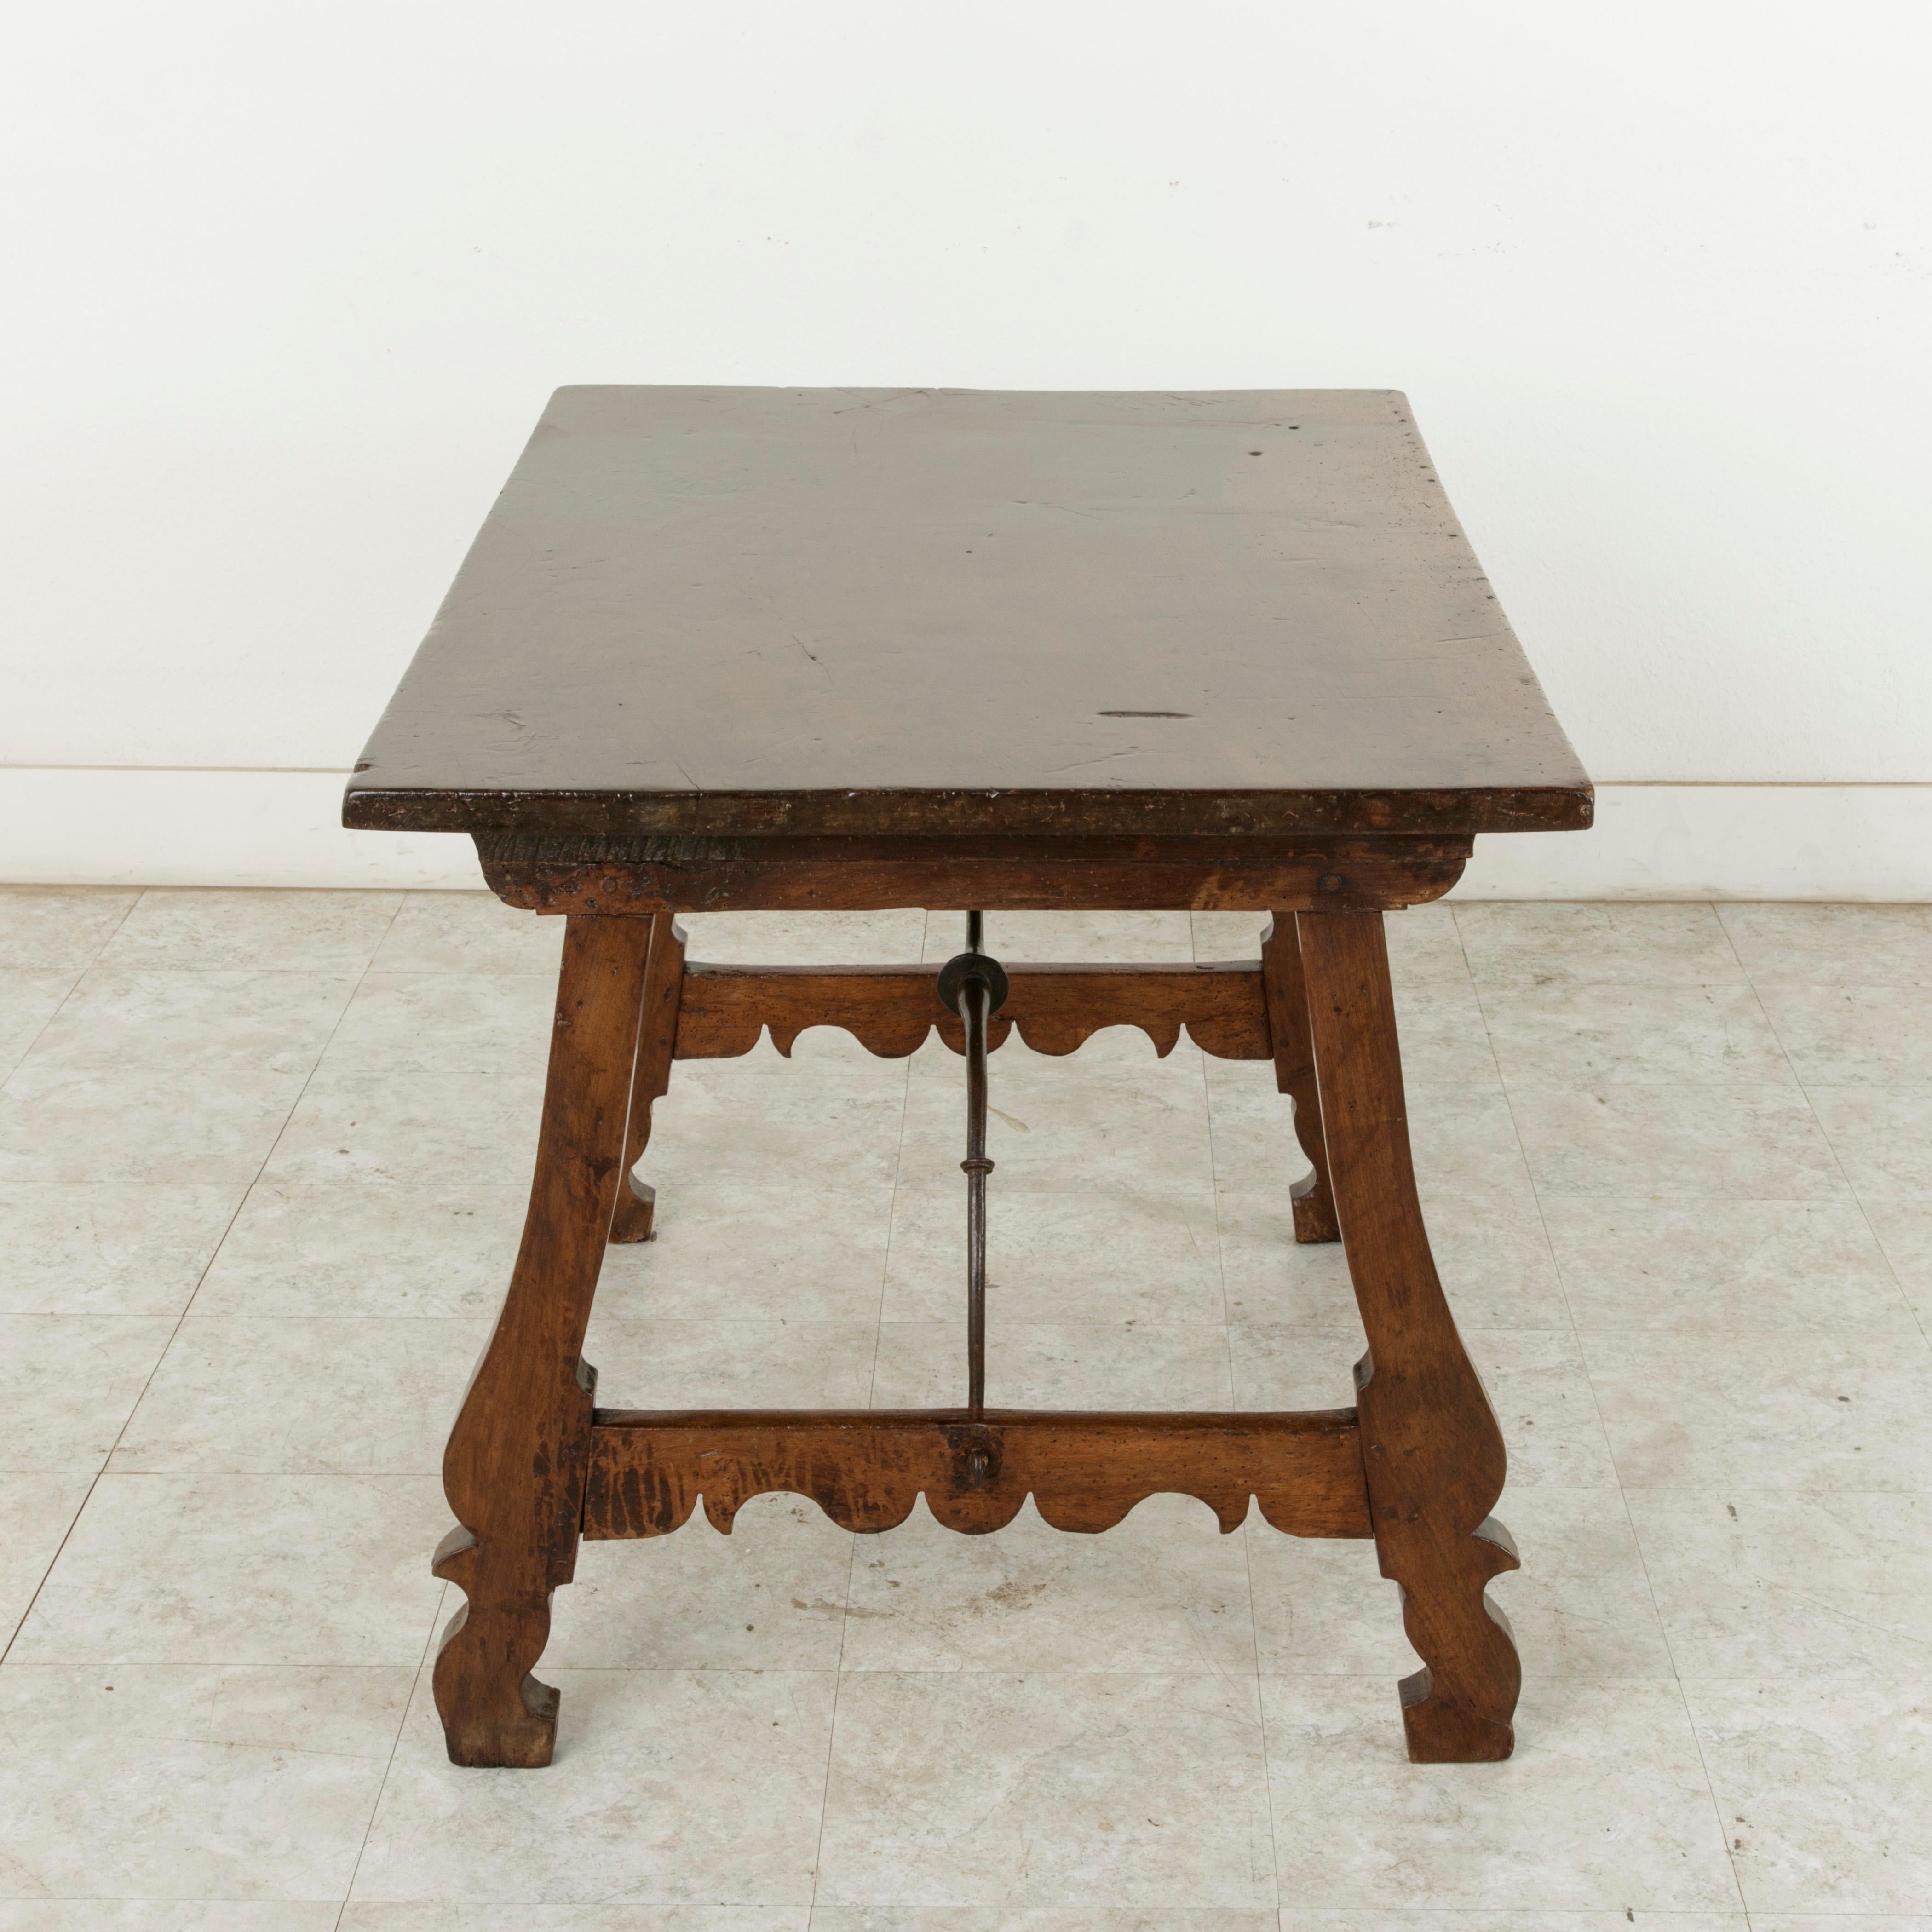 Forged Late 17th Century Spanish Renaissance Style Walnut Writing Table, Iron Stretcher For Sale